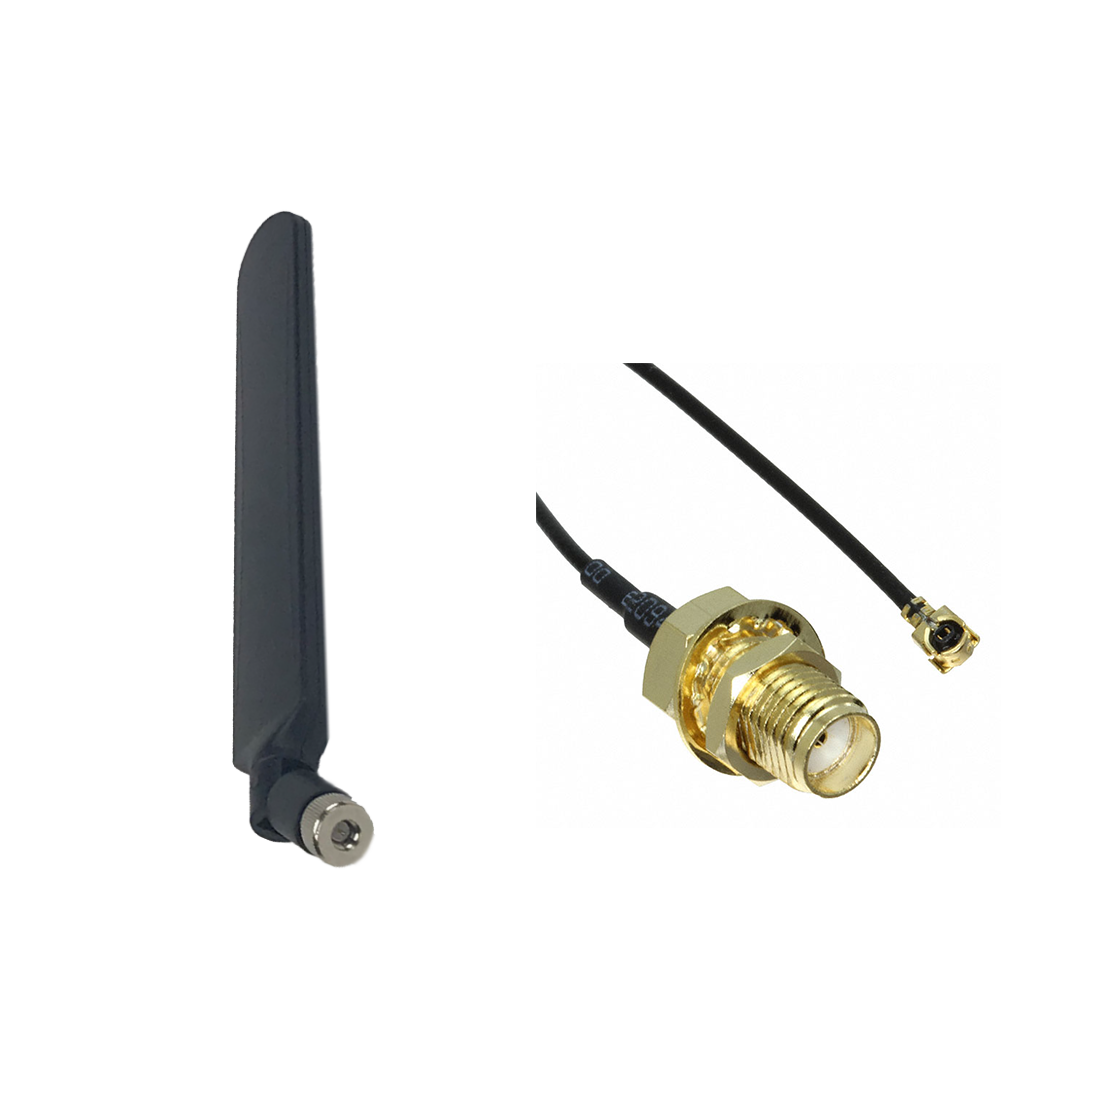 4G/LTE Cellular Antenna Kit for Honeywell AlarmNet Security and Fire Alarm Systems | CELL-ANTHB